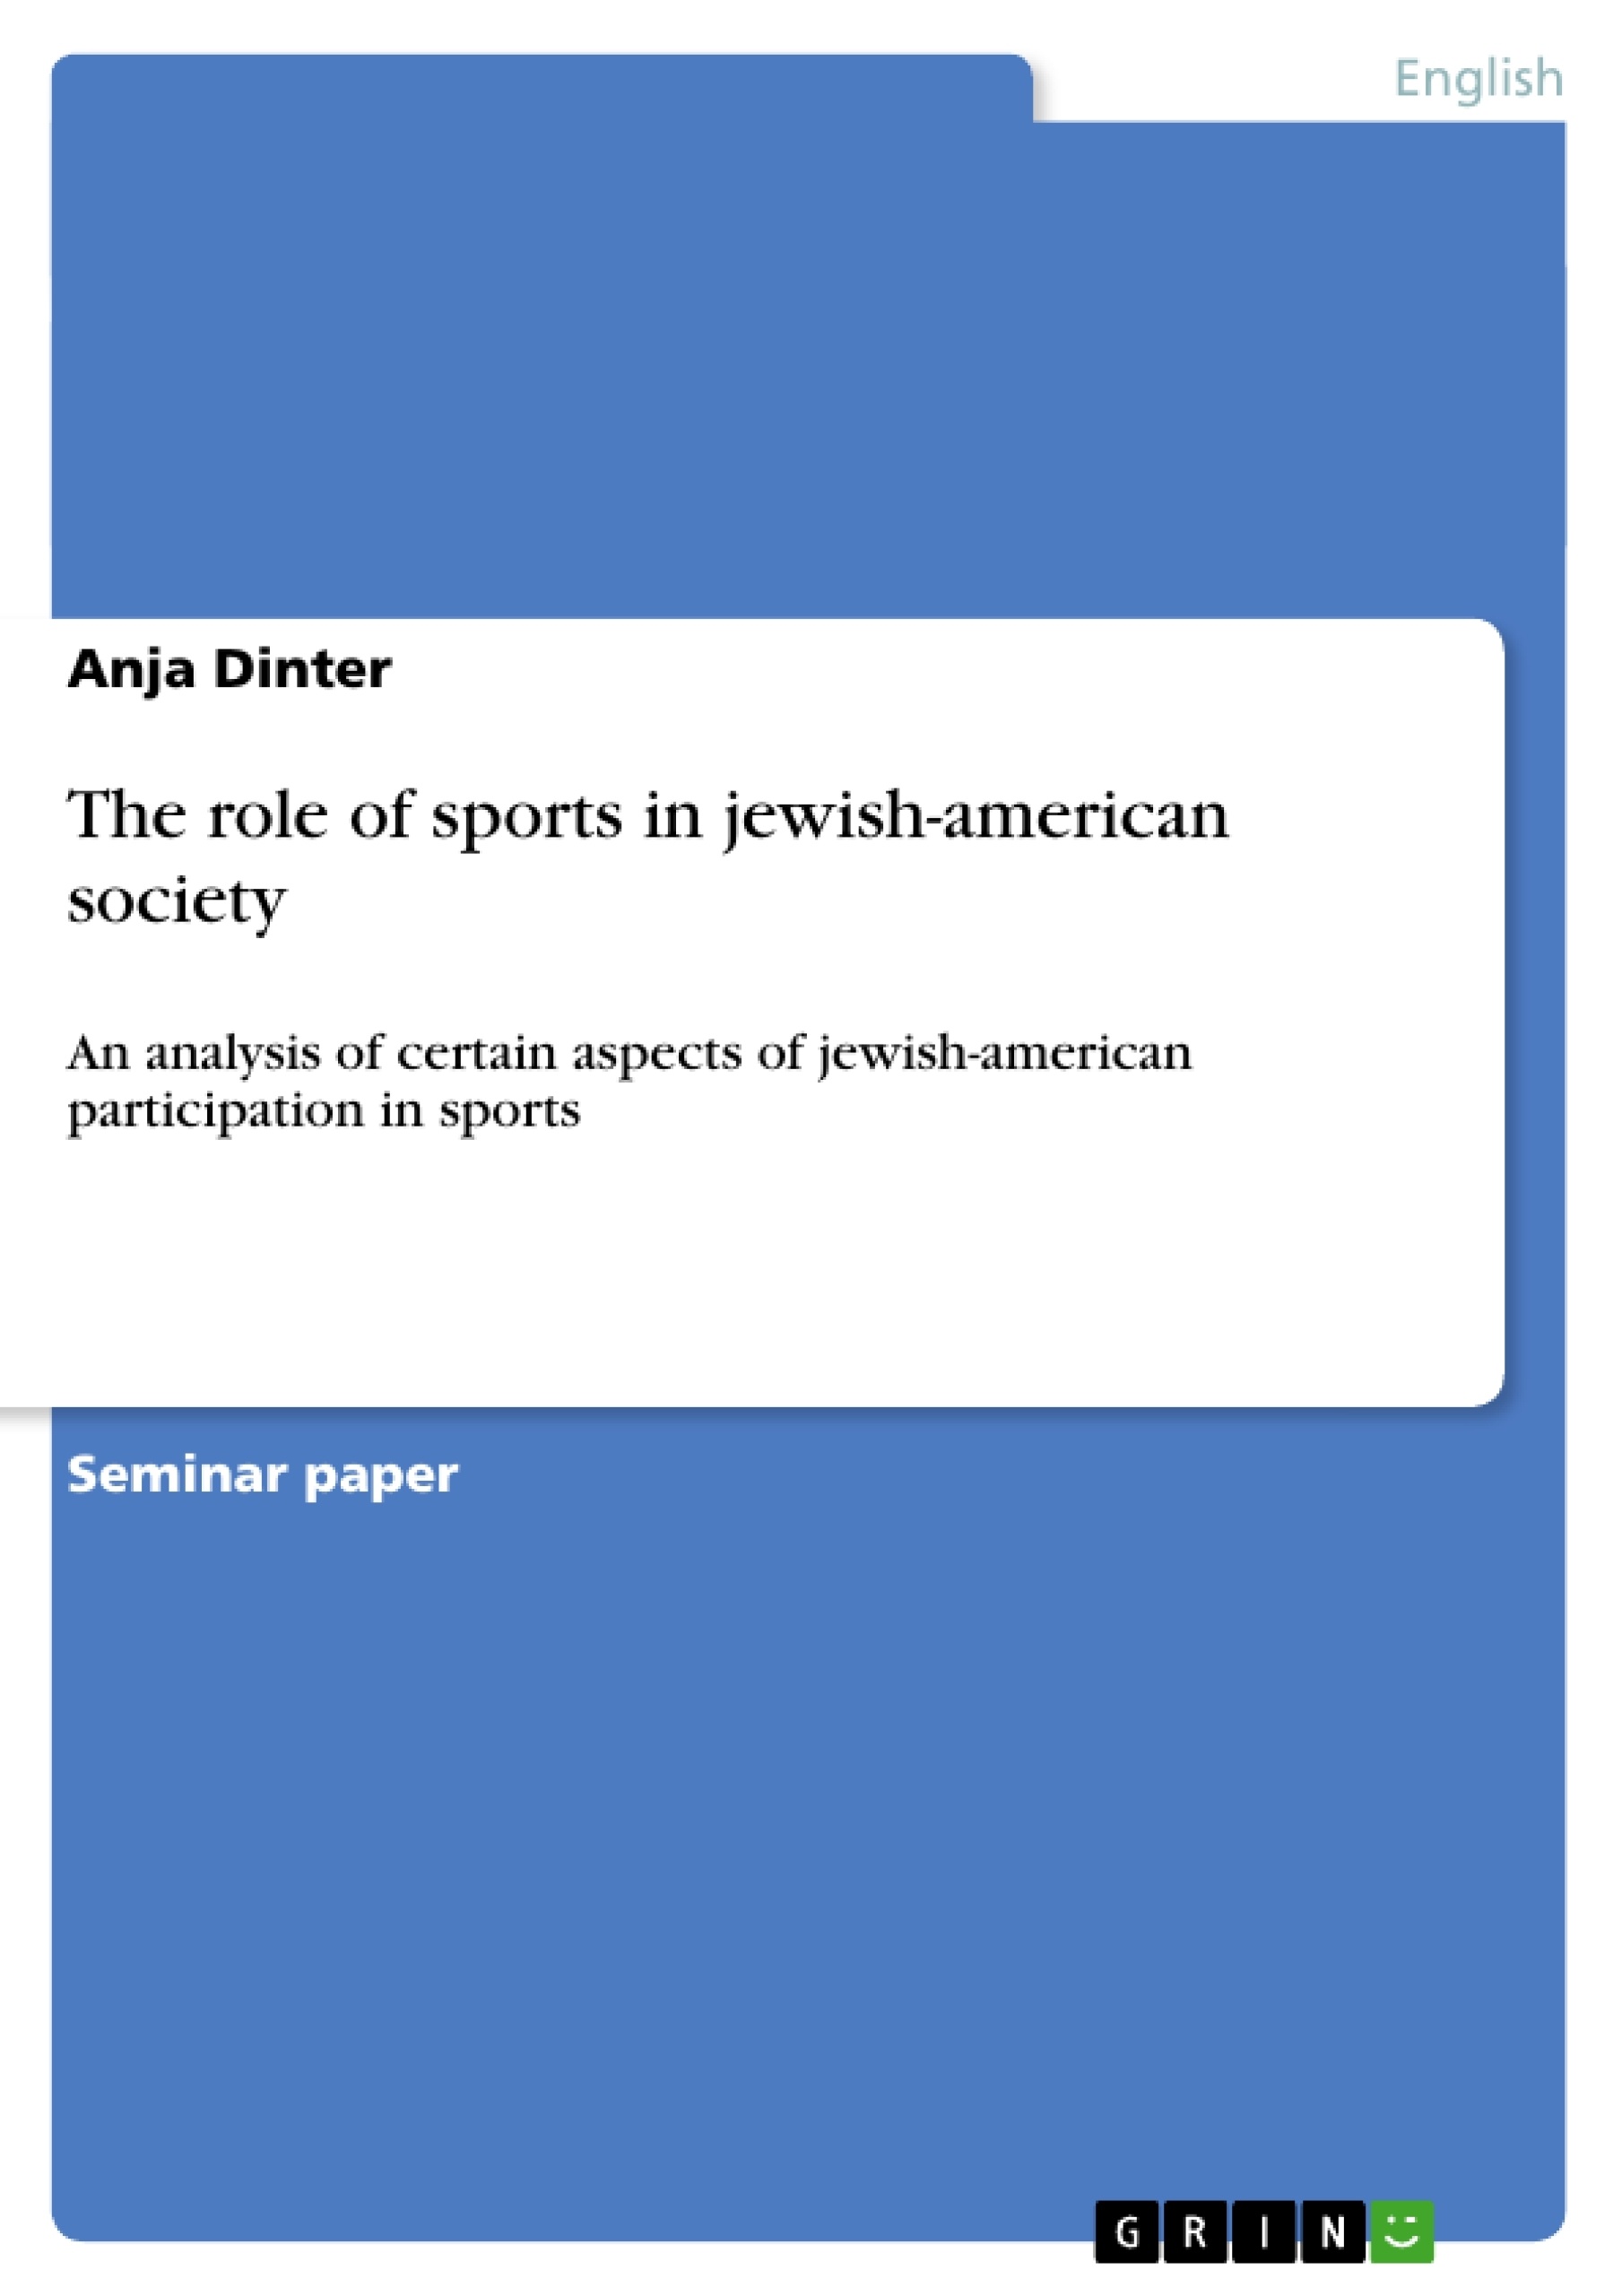 Título: The role of sports in jewish-american society 